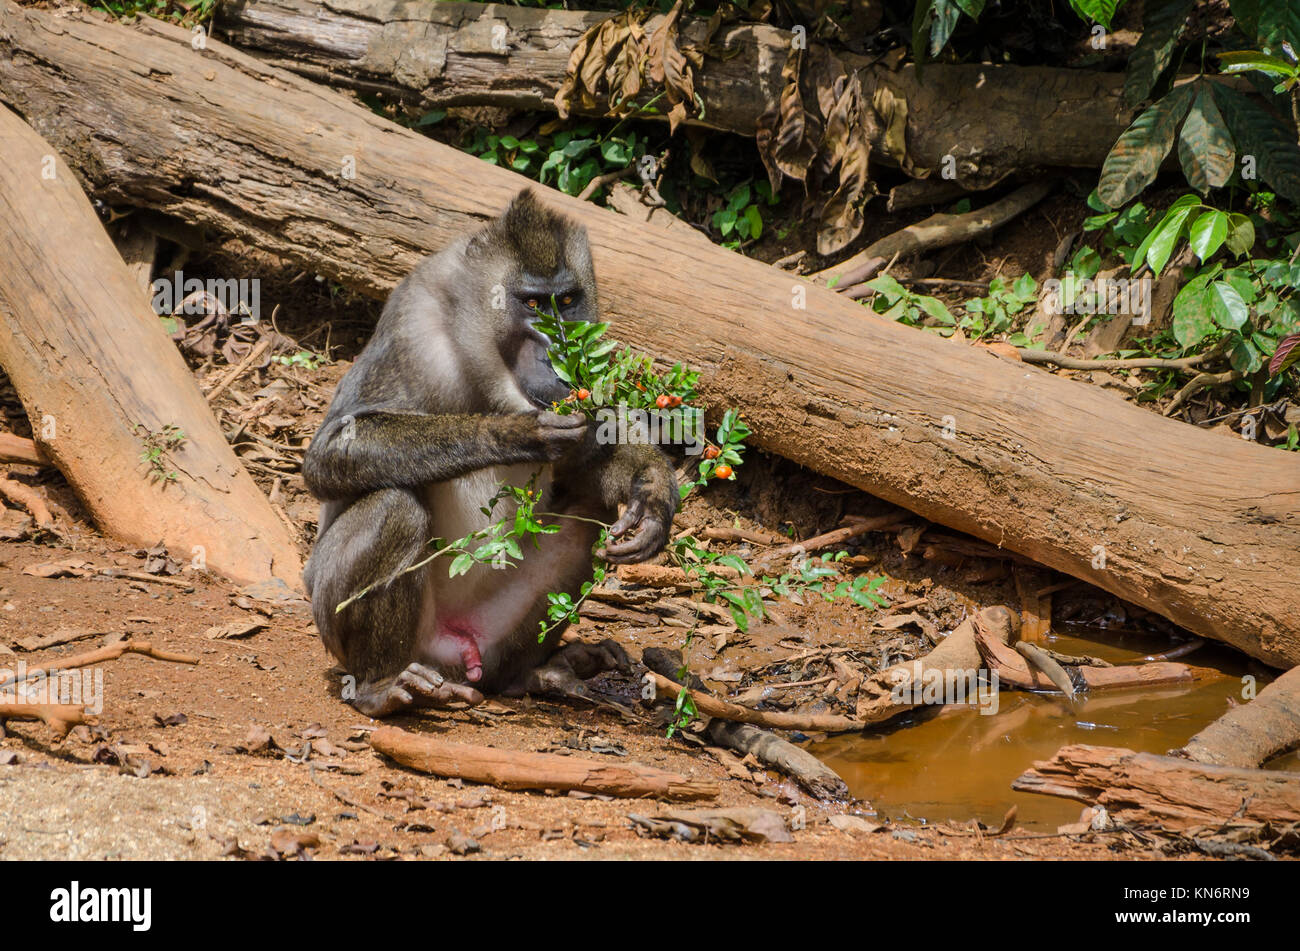 Drill monkey sitting at water feeding on berries in rain forest of Nigeria Stock Photo